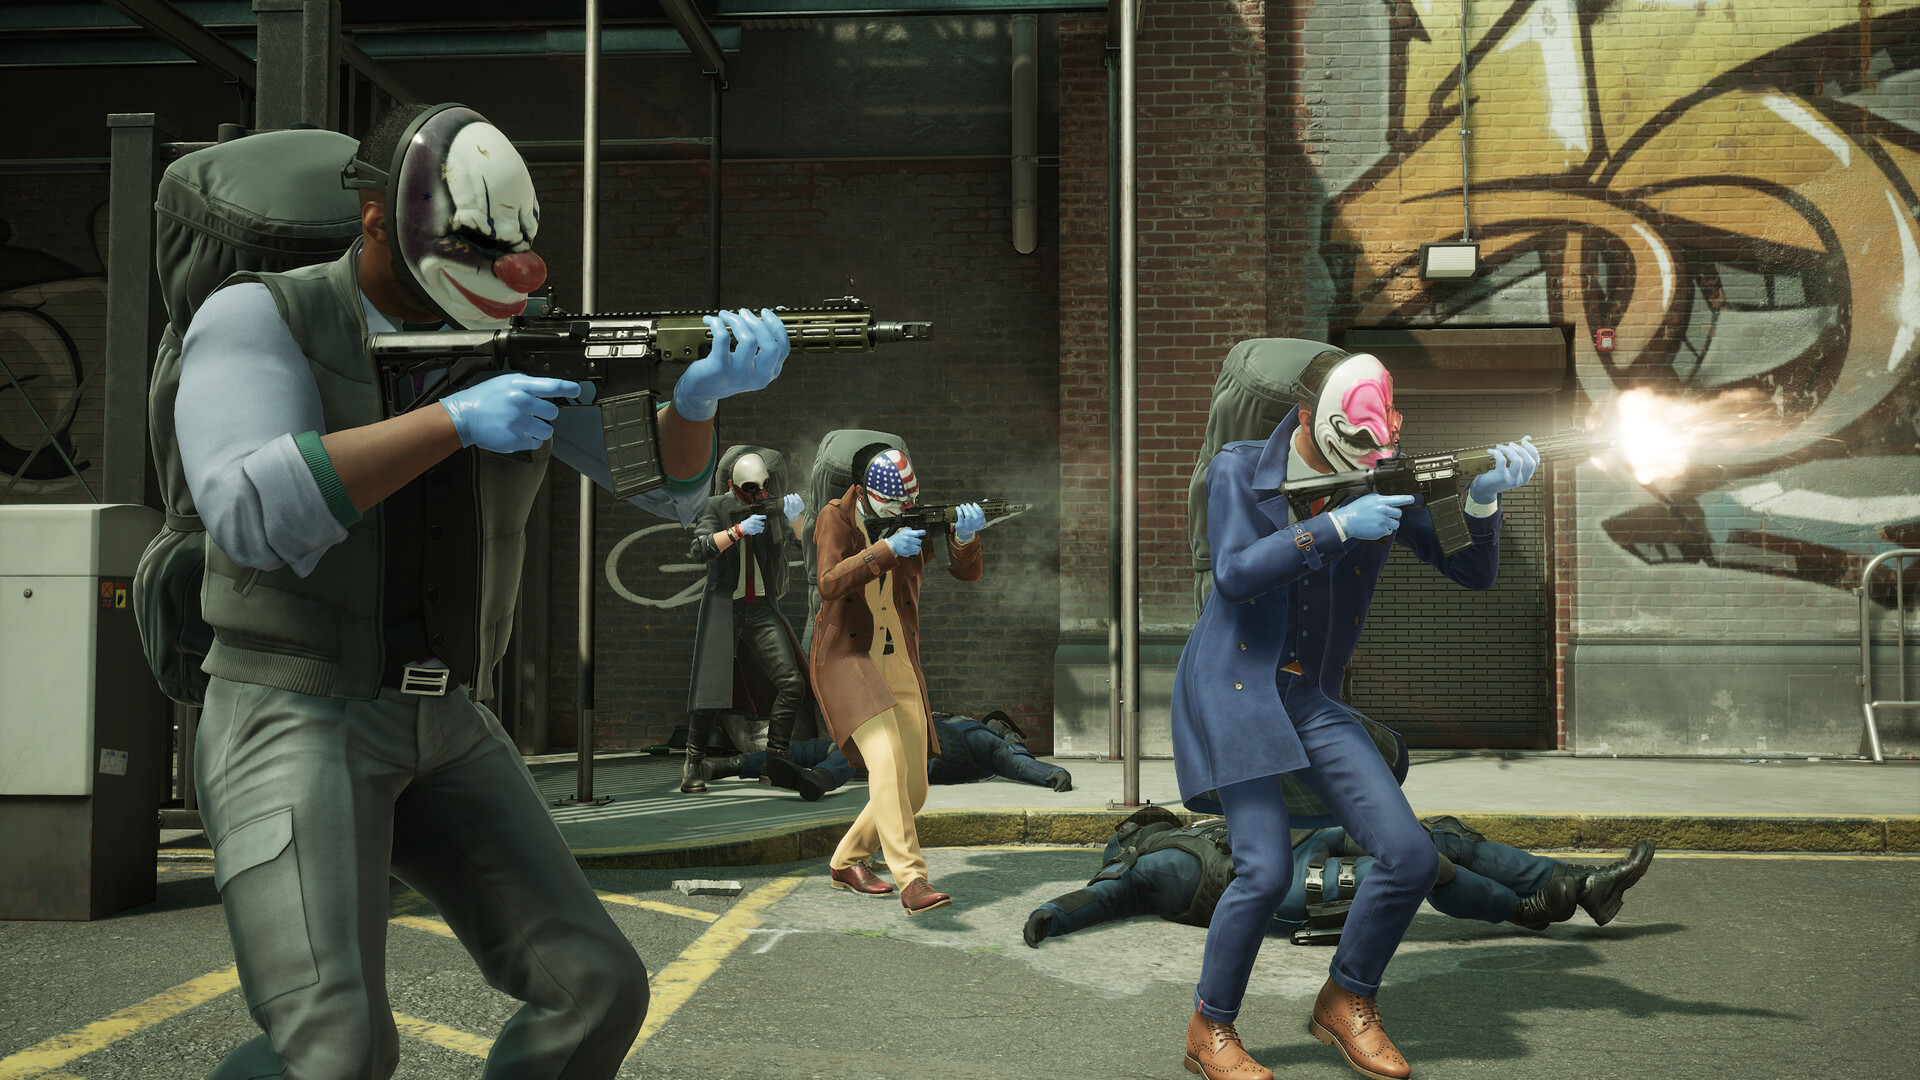 Payday 3 is on Current-Gen Consoles to “Create the Best Version of the Game” – Starbreeze